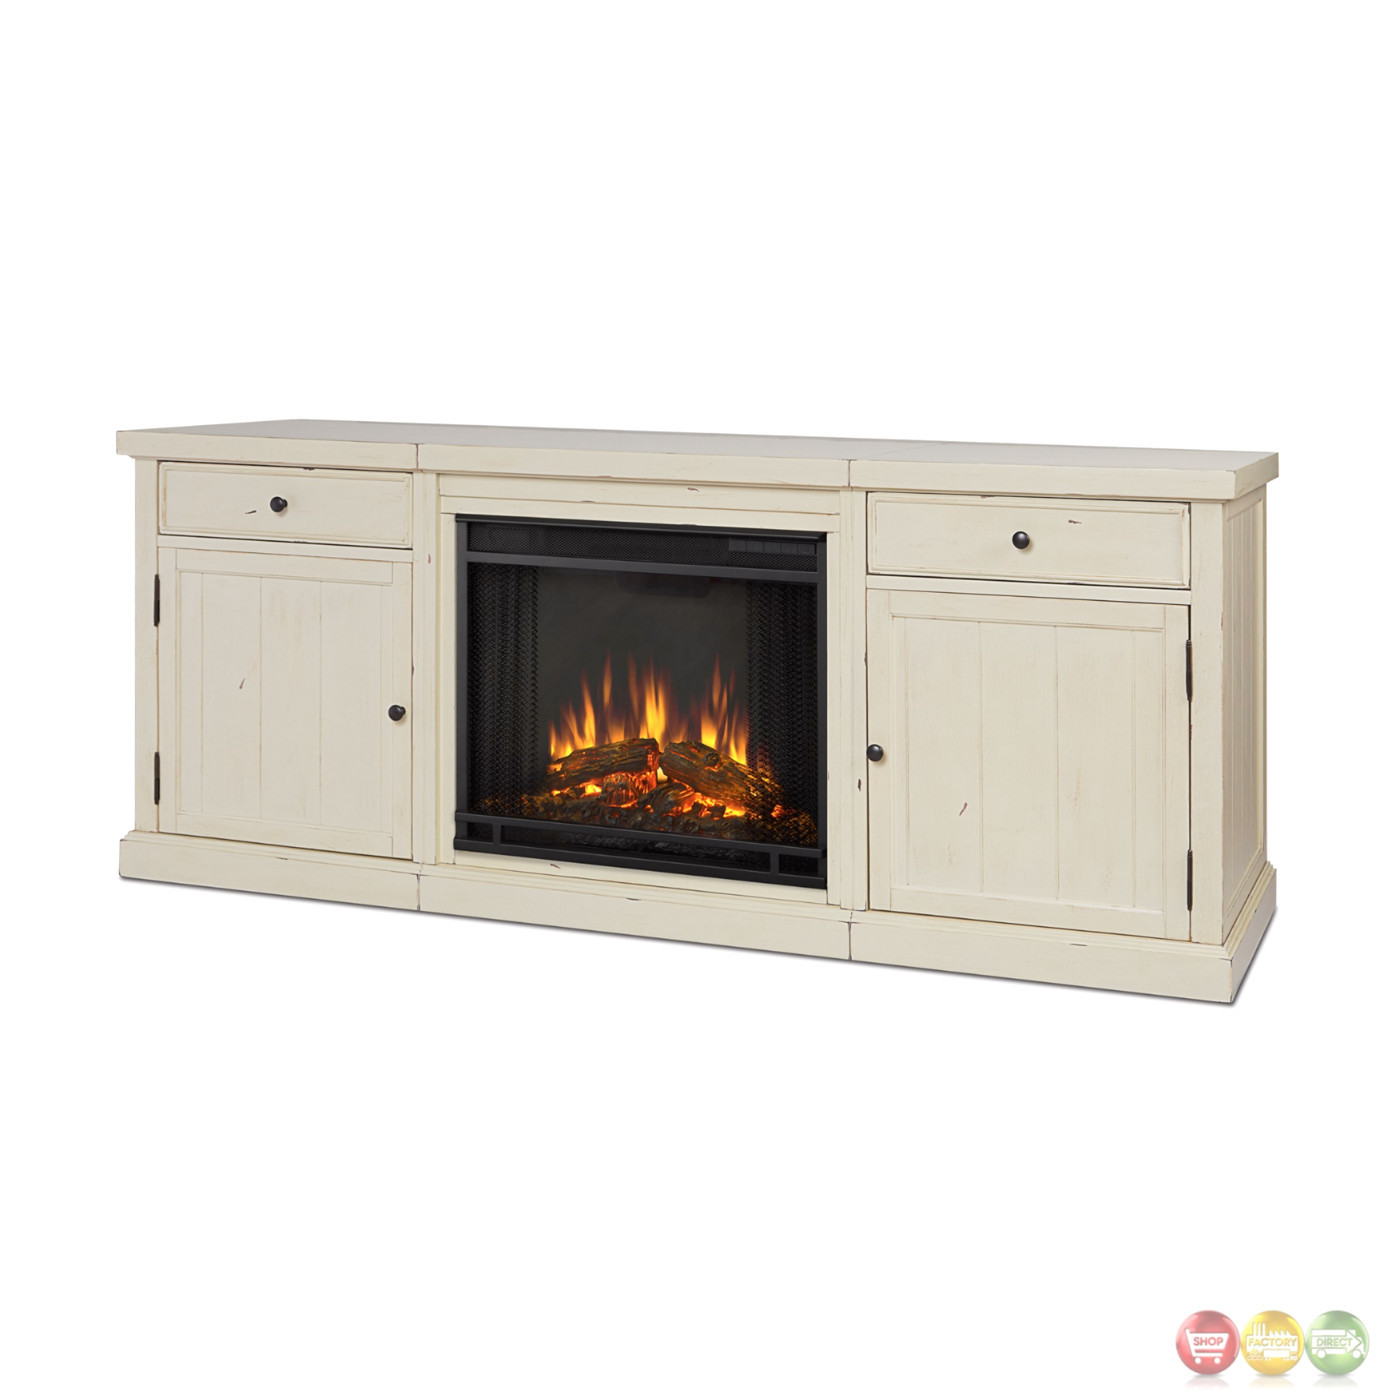 Distressed Electric Fireplace
 Cassidy Entertainment Center Electric Fireplace In